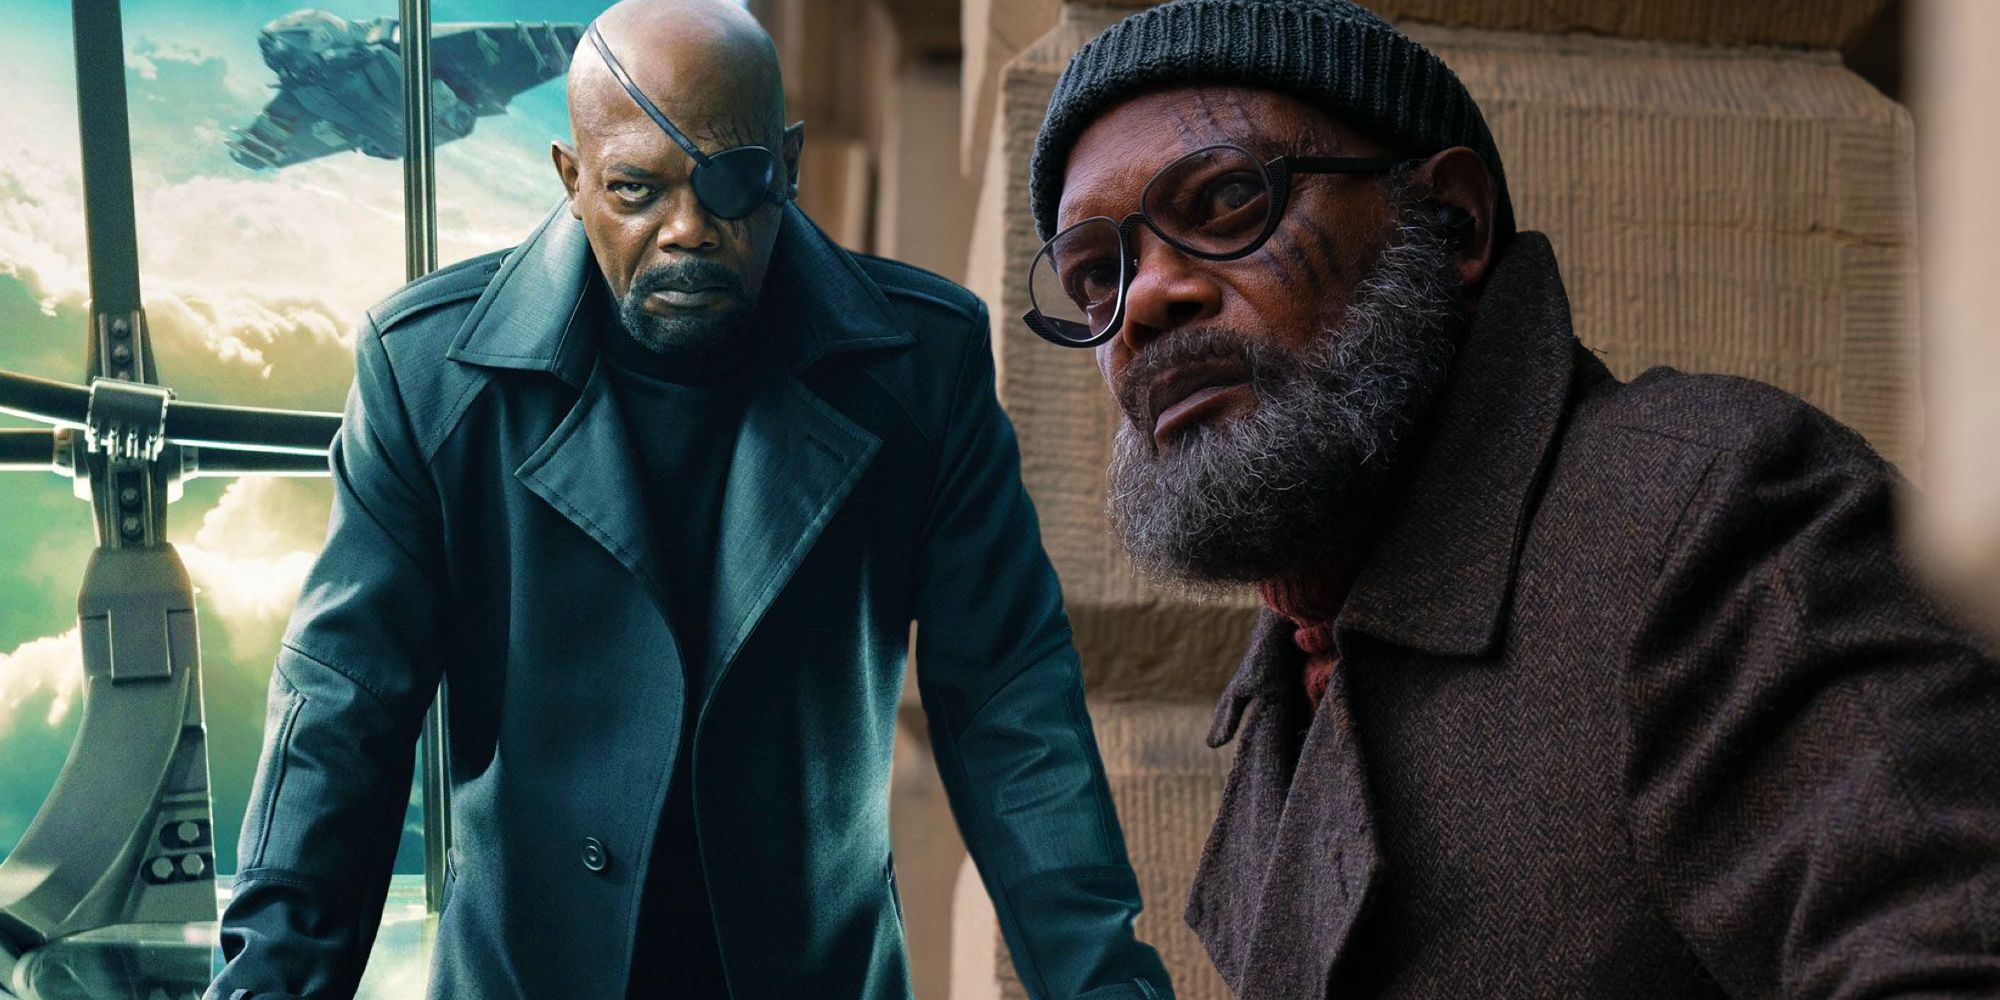 Samuel L Jackson as Nick Fury in The Avengers next to Fury from Secret Invasion